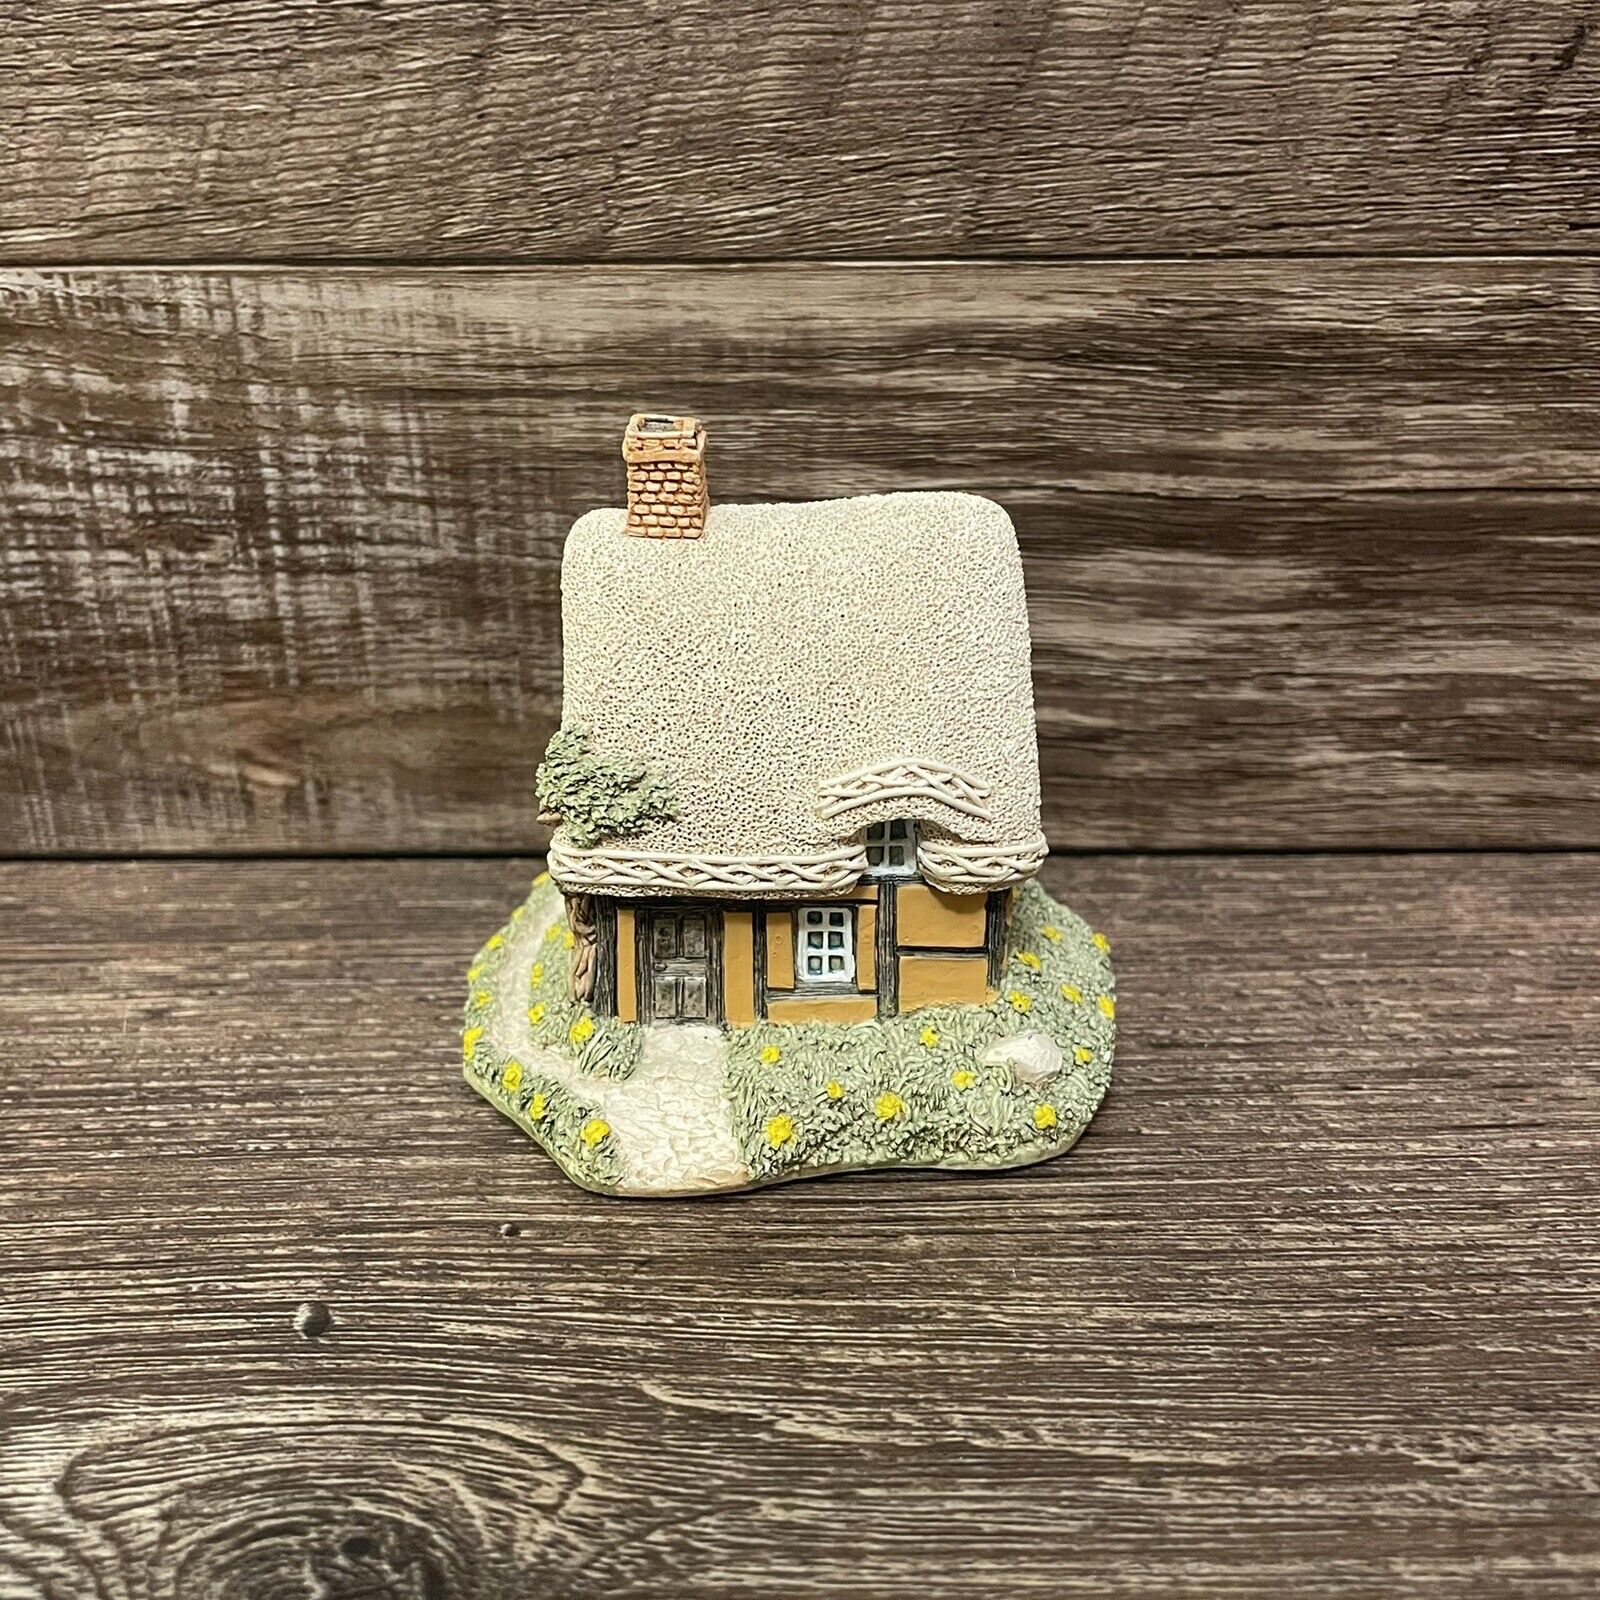 Lilliput Lane Buttercup Cottage Miniature Masterpieces Collection Box And Deed